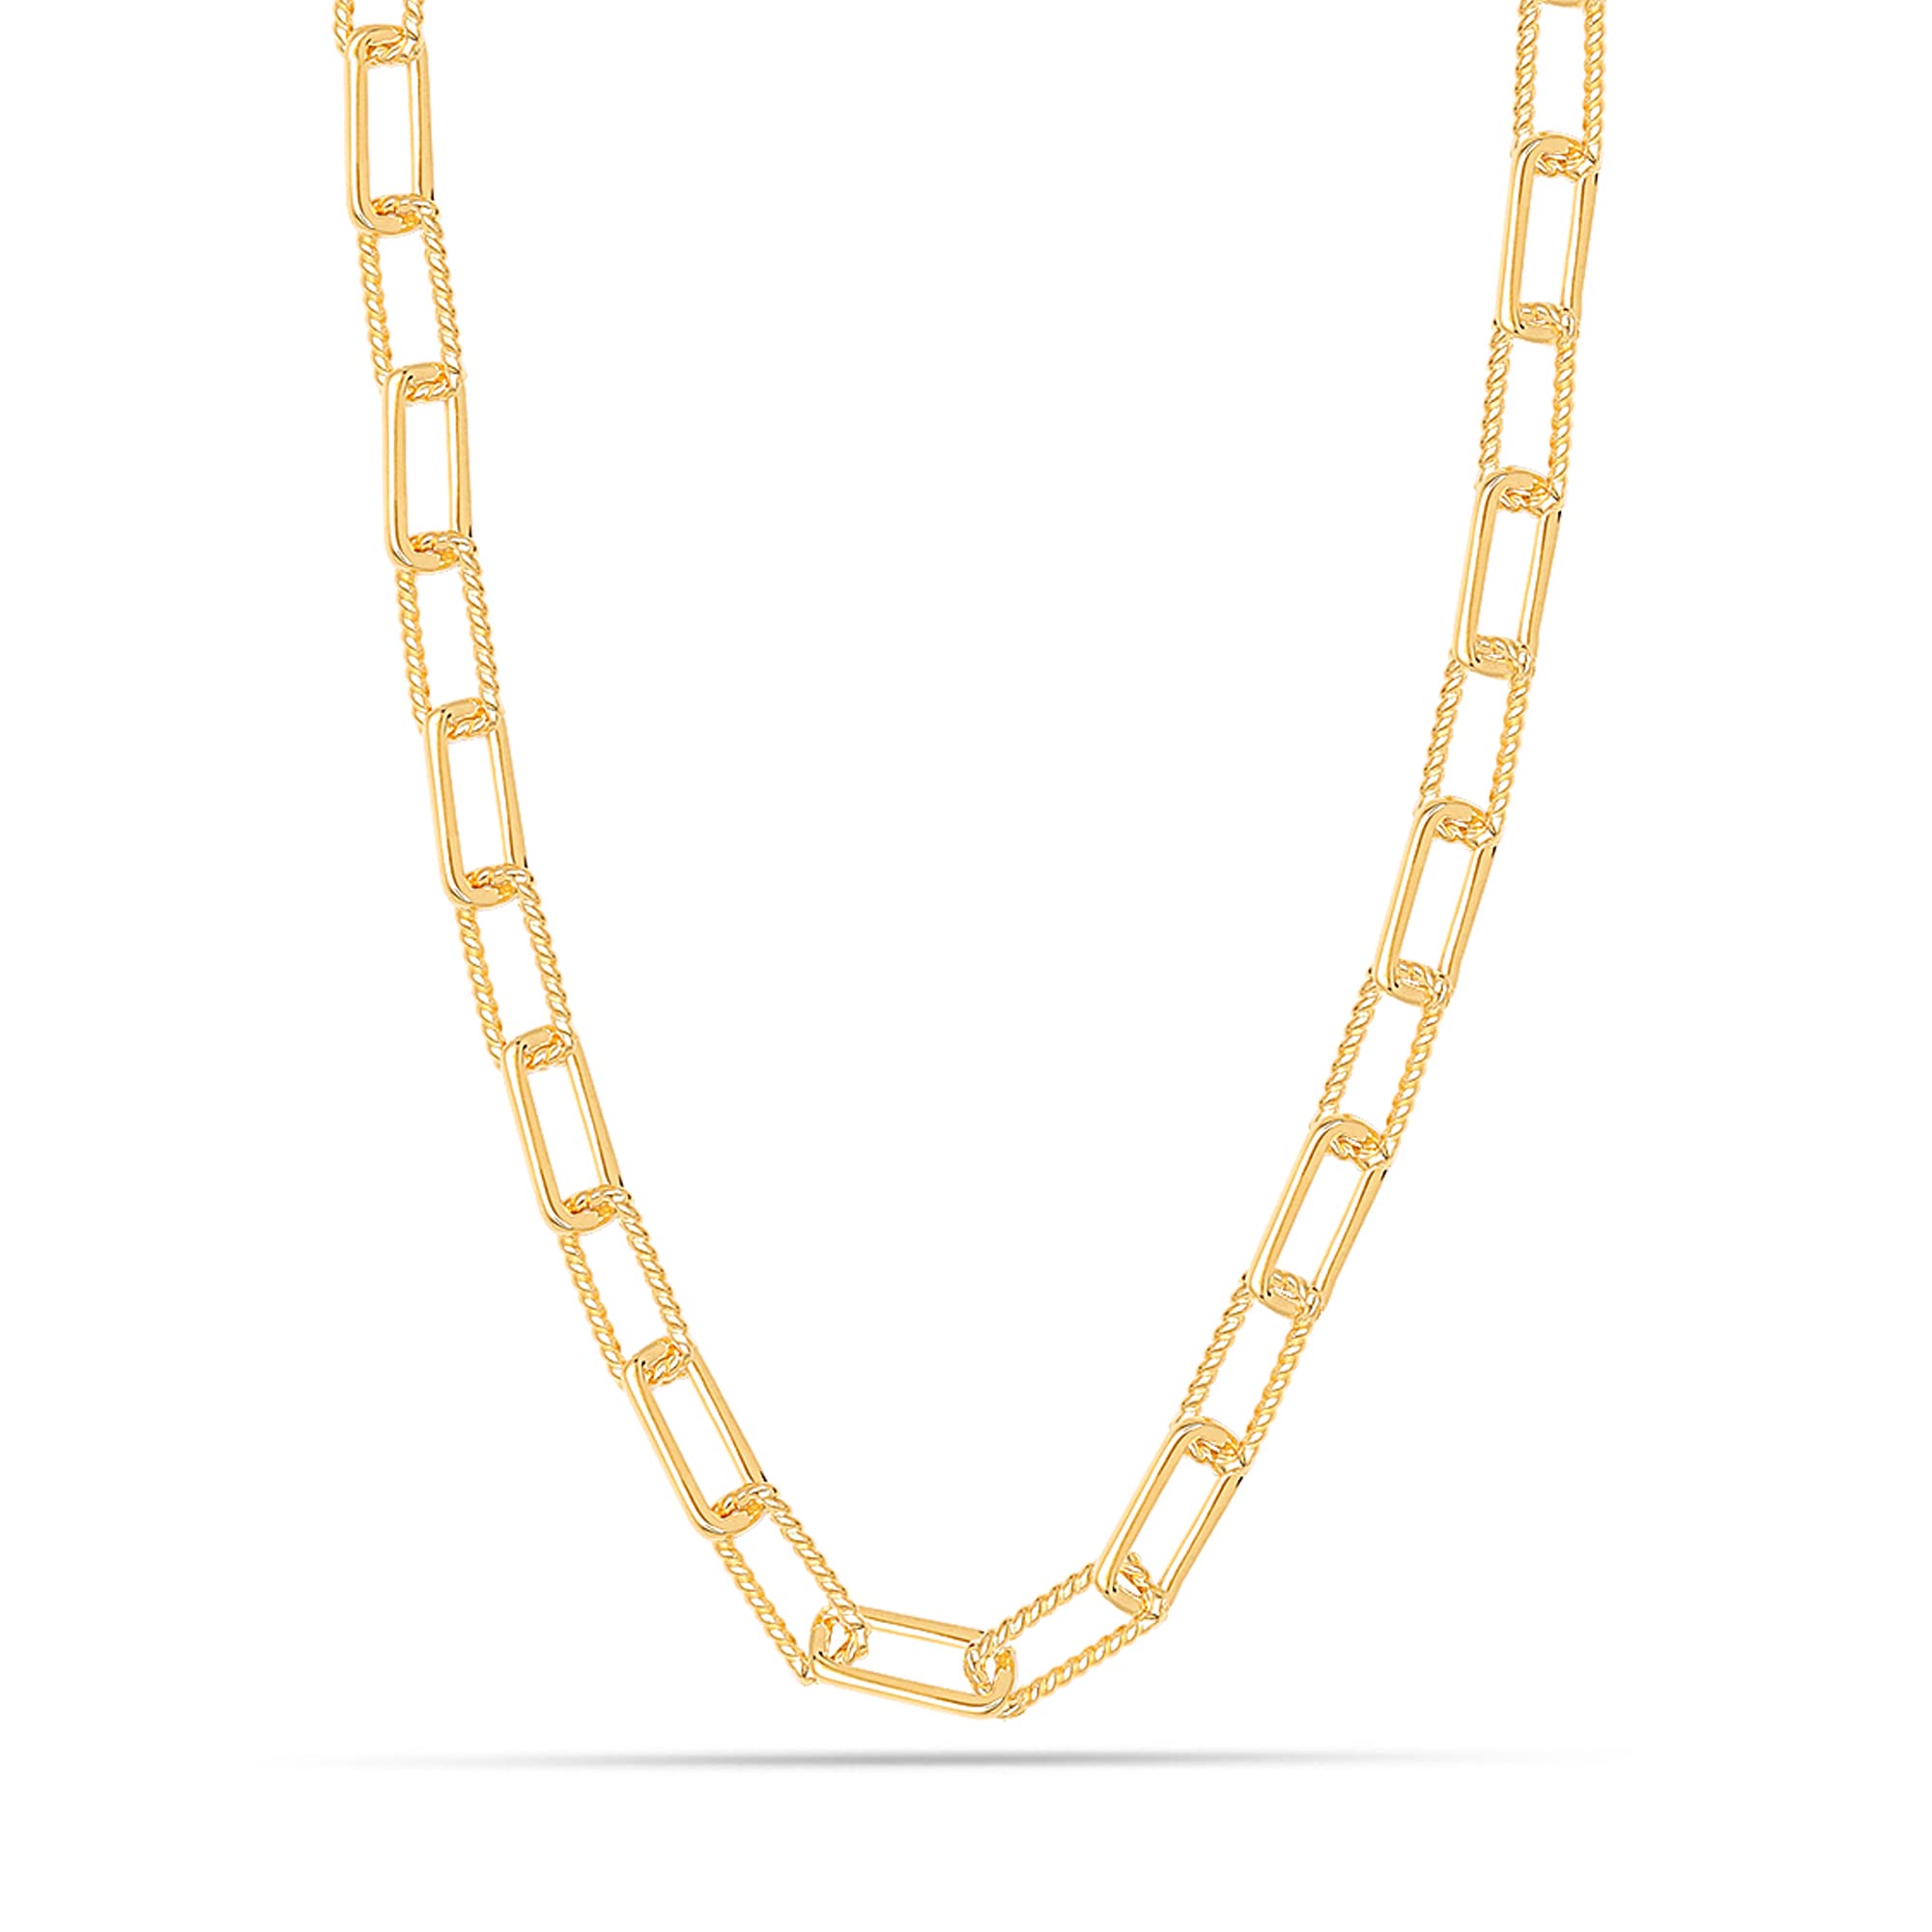 925 Sterling Silver Italian Gold Plated BIG PaperClip Link Chain Necklace for Women